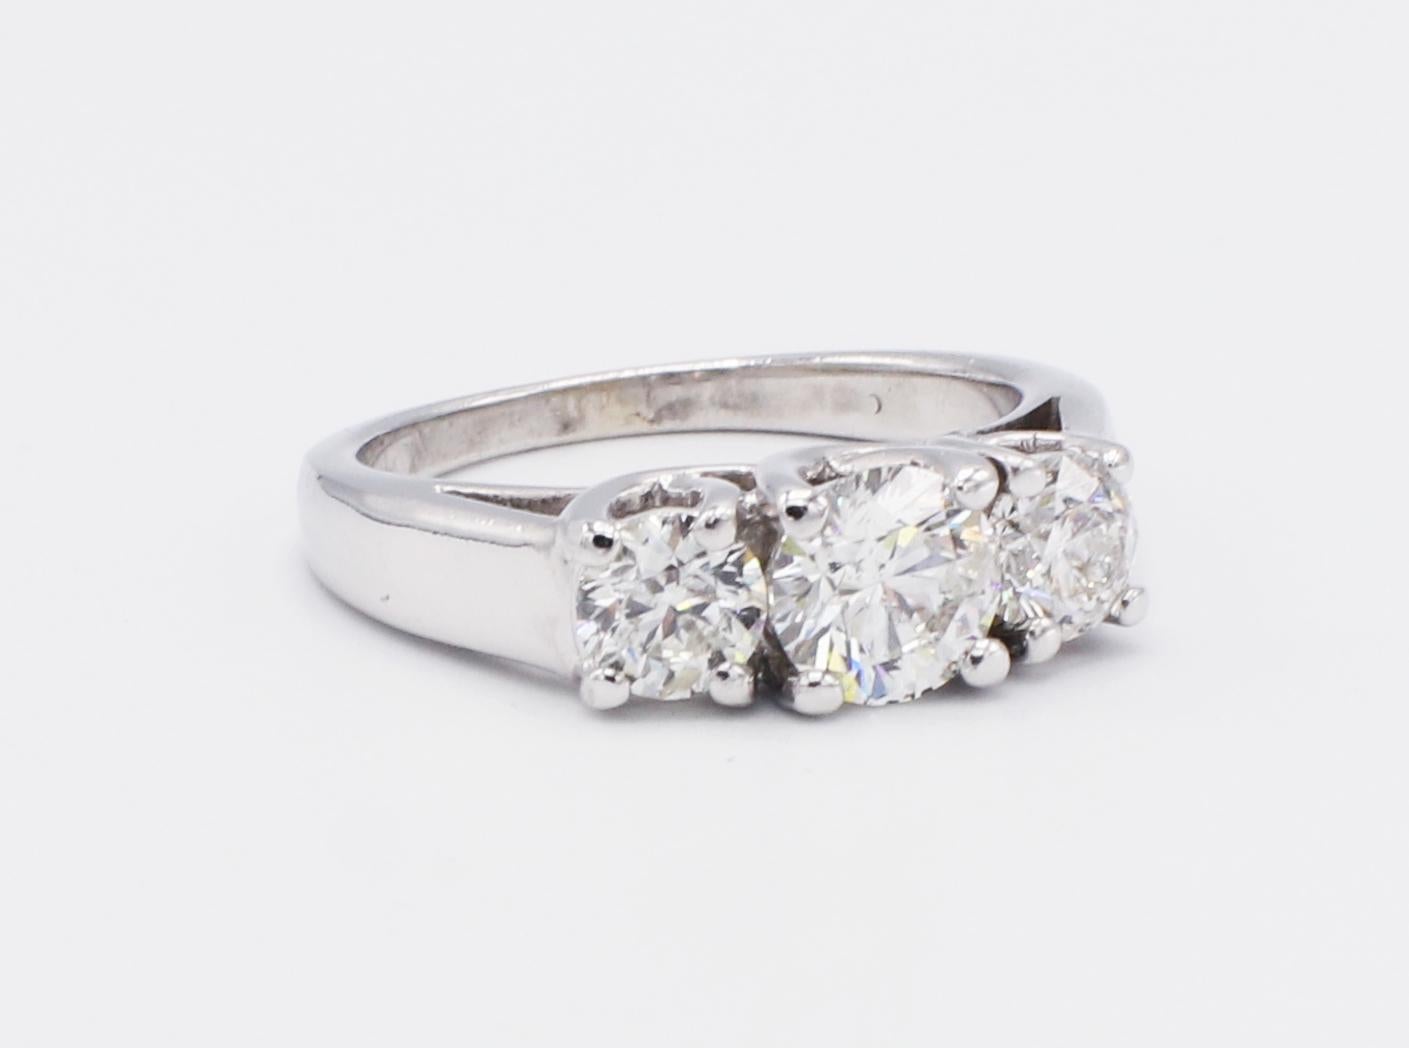 Vintage 14K White Gold 3 Stone Round Brilliant Cut Diamond Engagement Ring Size 6

Metal: 14k white gold
Diamonds: 3 round brilliant cut diamonds. Approx. 1.40 CTW I I1. Center stone is approx. .75 cts, the two side stones are approx. .33 cts 
Size: